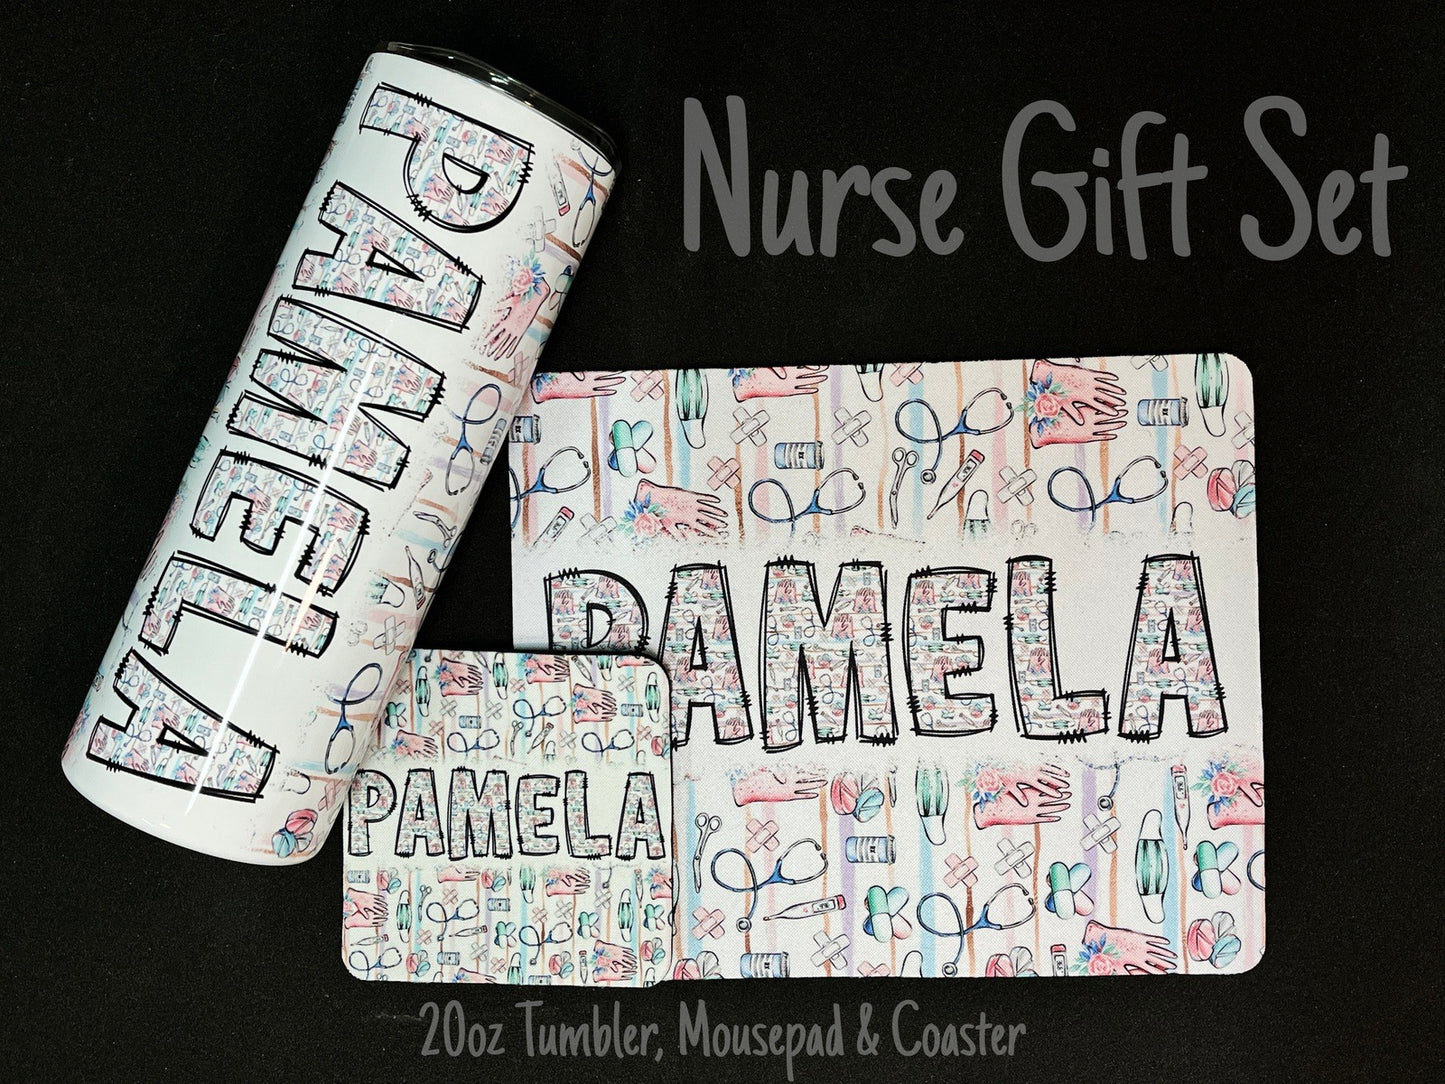 Personalized Nurse Name Gift Set with Tumbler, Mousepad and Coaster